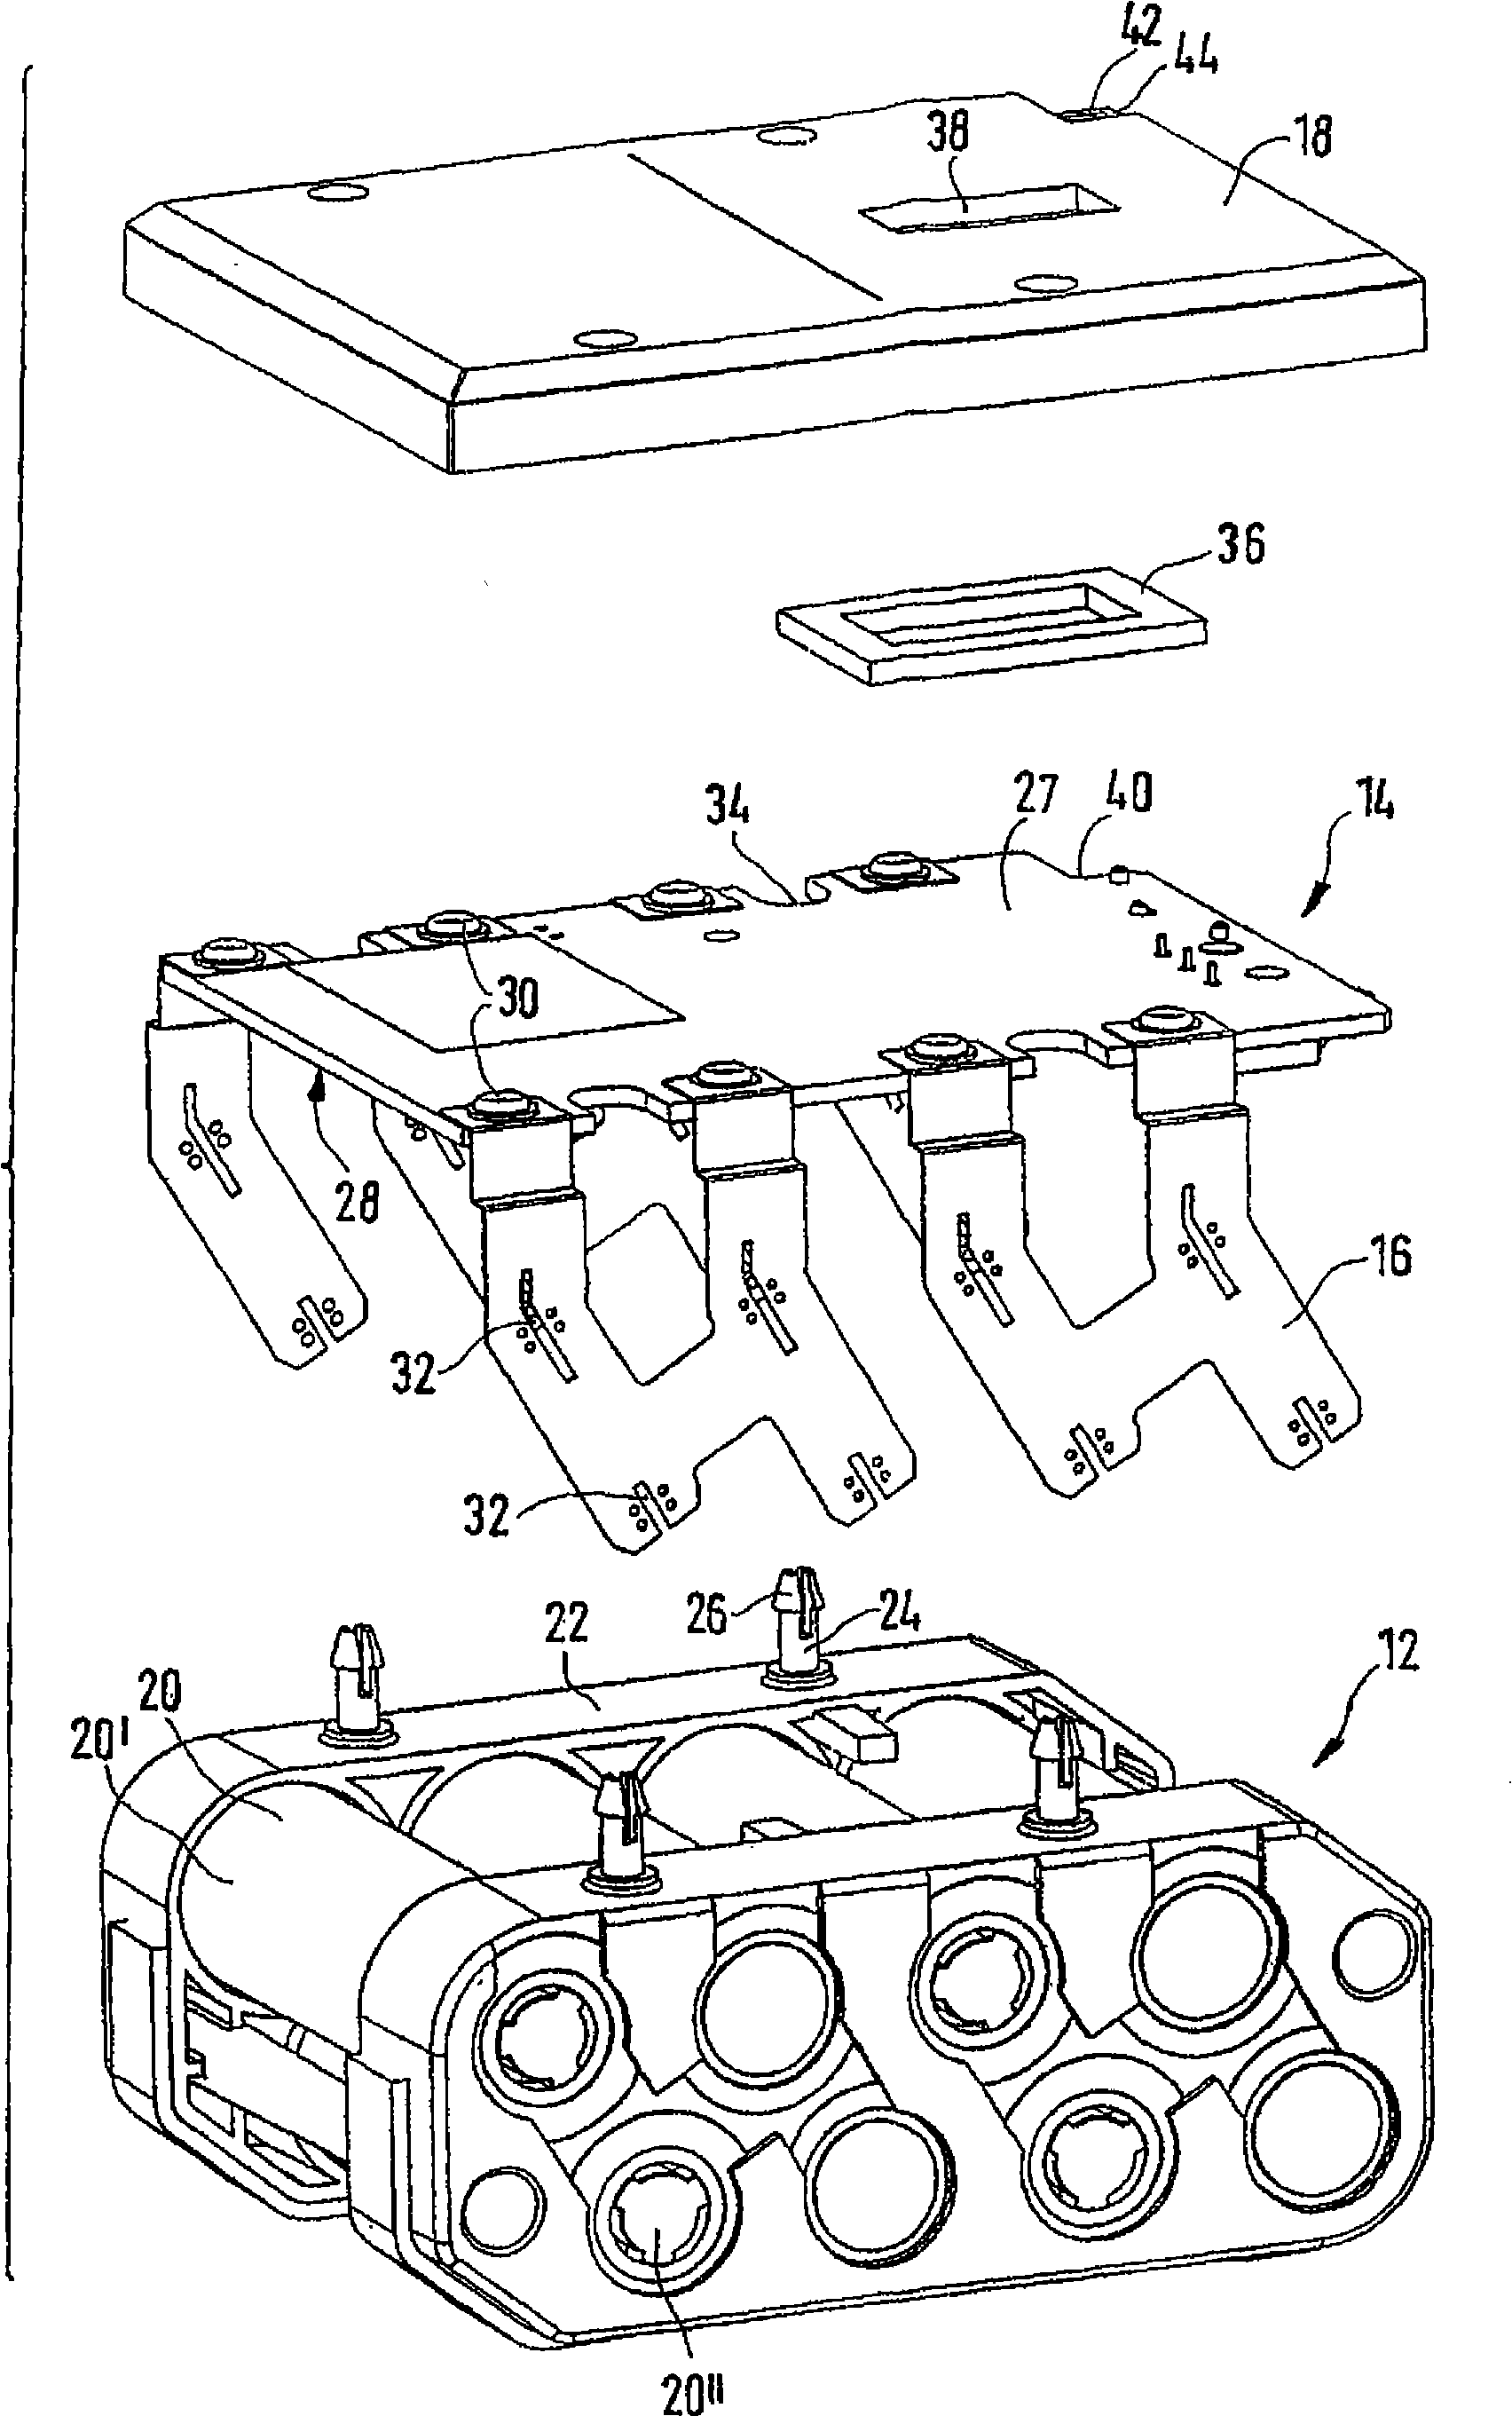 Accumulator group and handheld electric tool